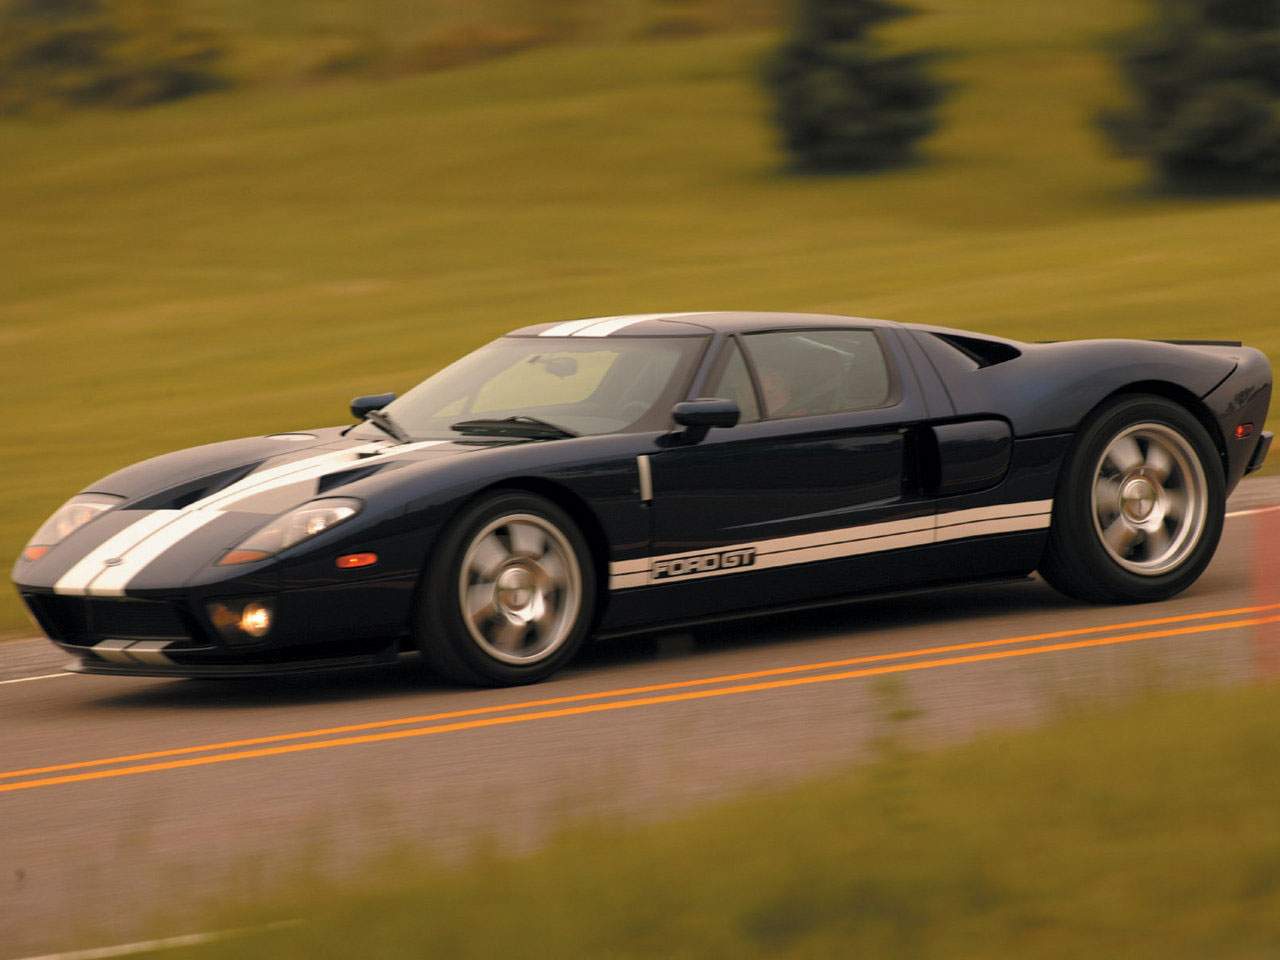 Gallery Ford Gt Wallpaper